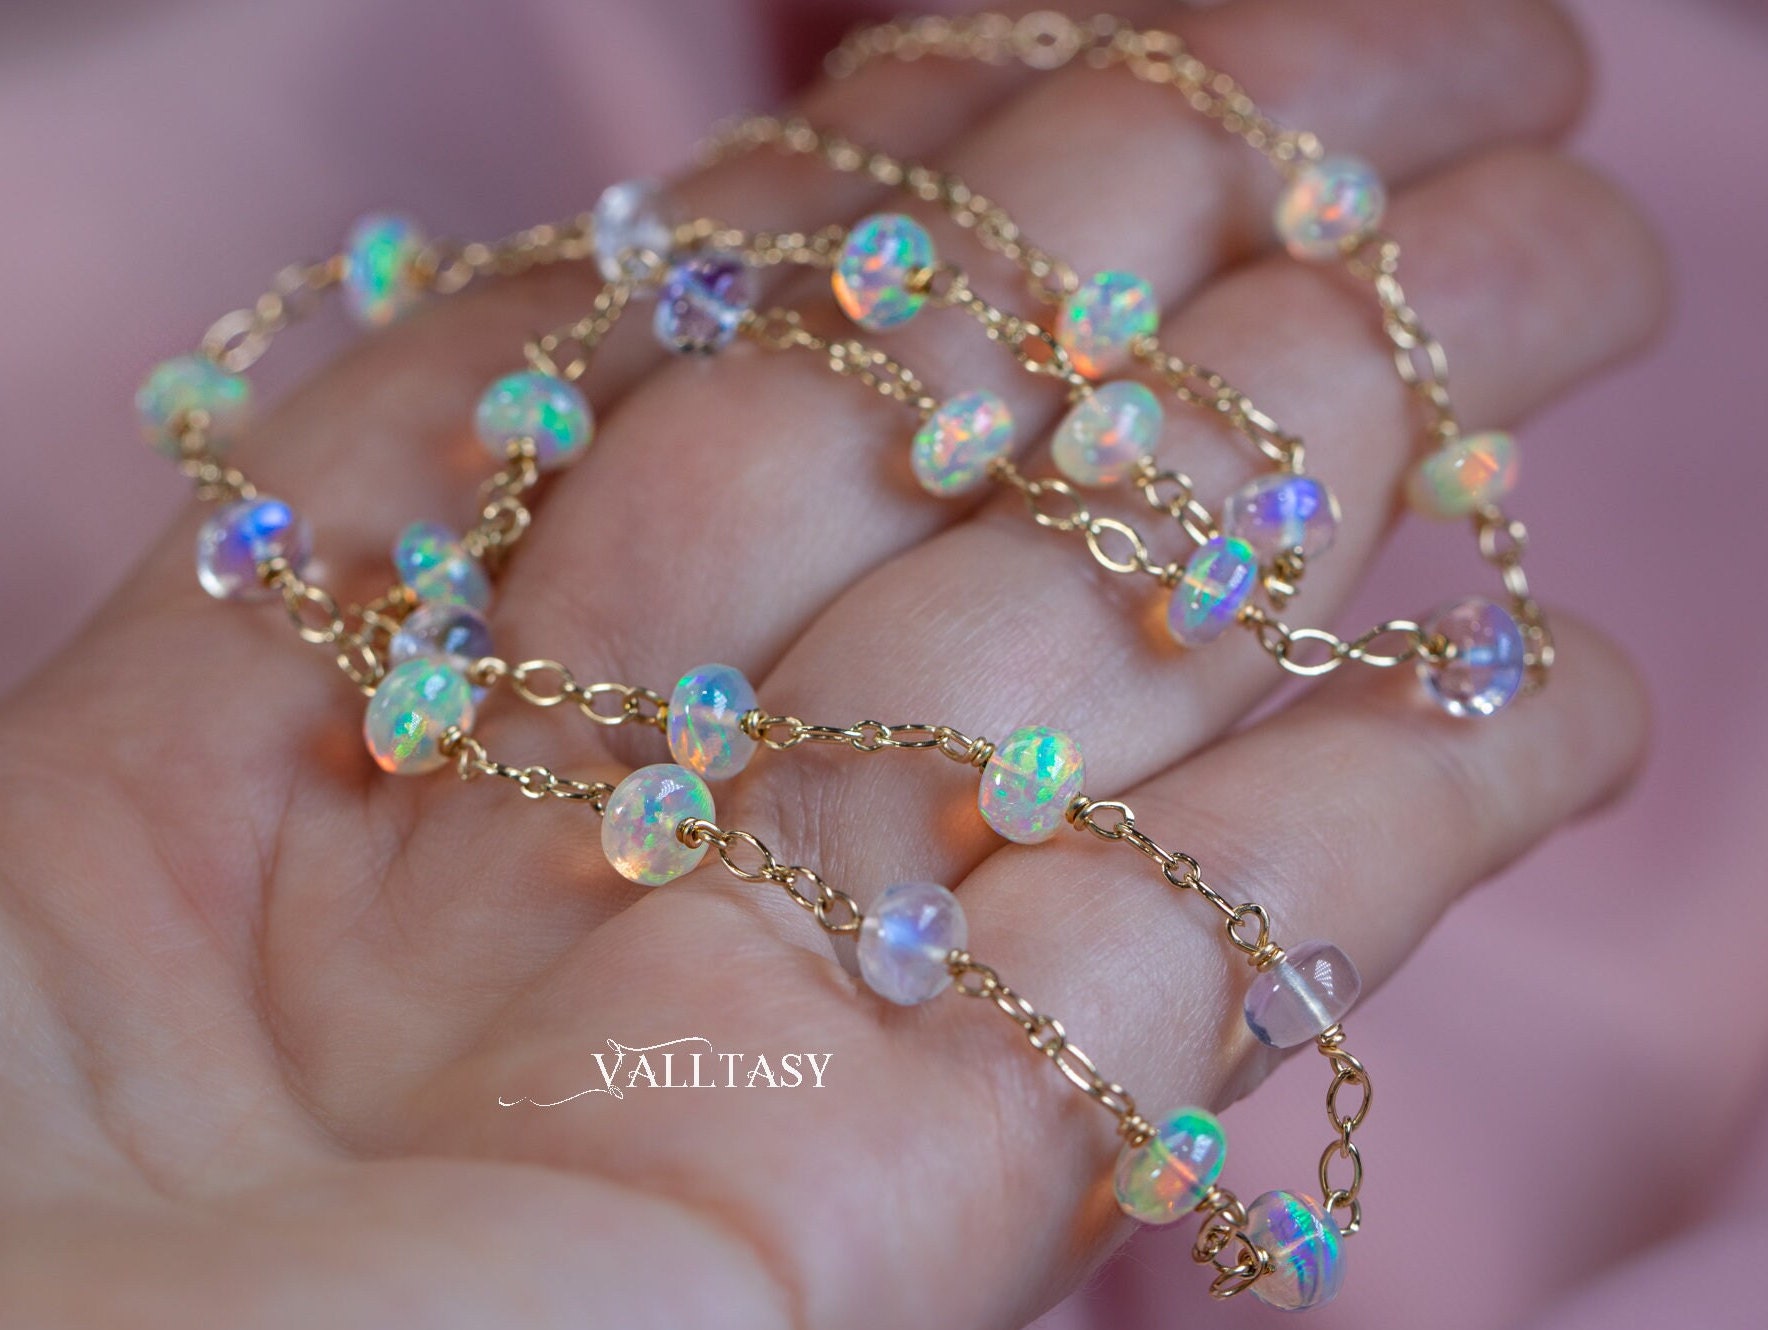 Solid Gold 14K Ethiopian Opal and Rainbow Moonstone Gemstone Necklace, Gemmy Necklace